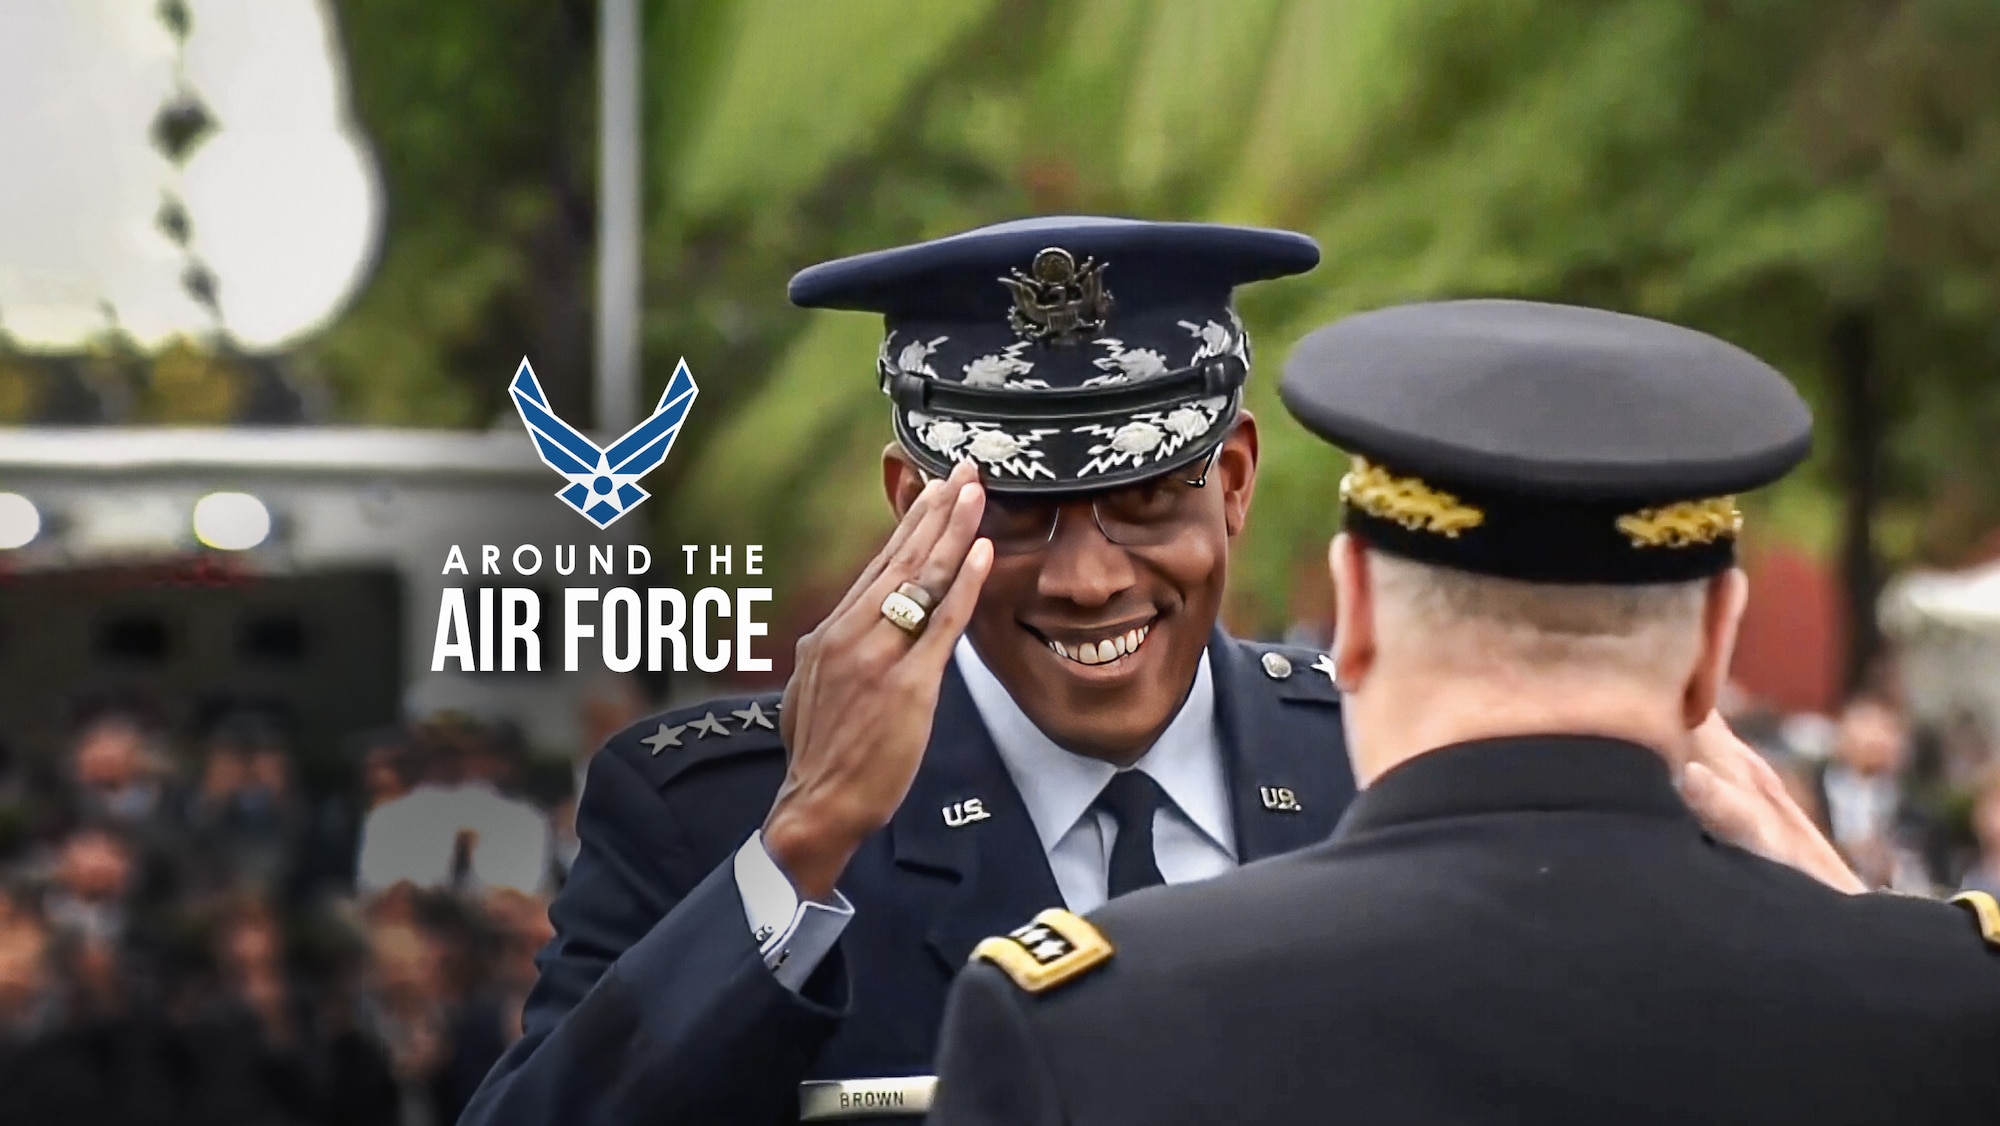 Around the Air Force: Brown Becomes Chairman of the Joint Chiefs, More ...